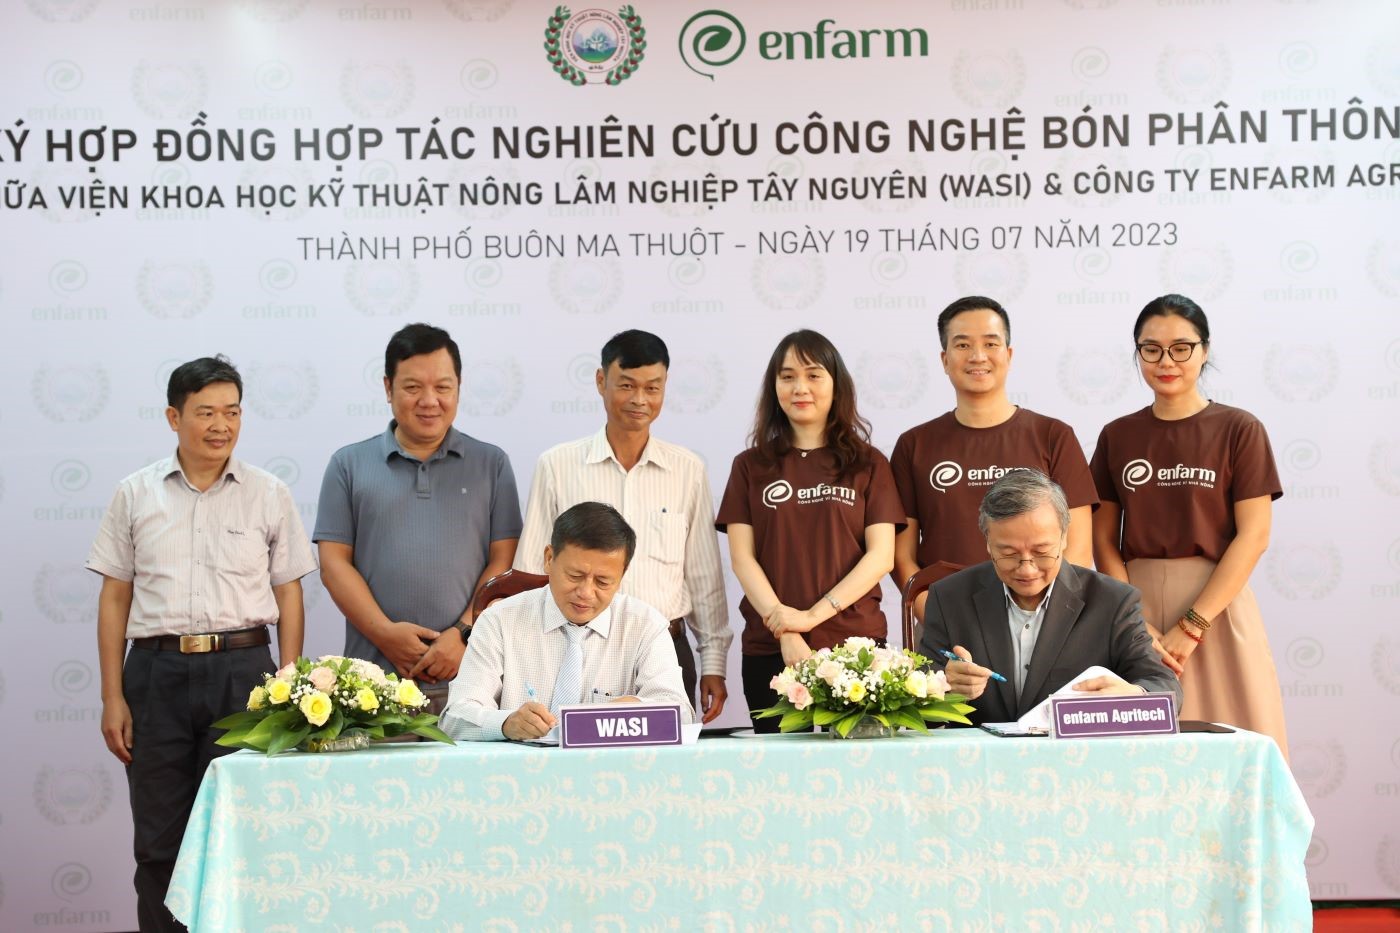 Signing of cooperation contract for researching "smart" fertilizer technology